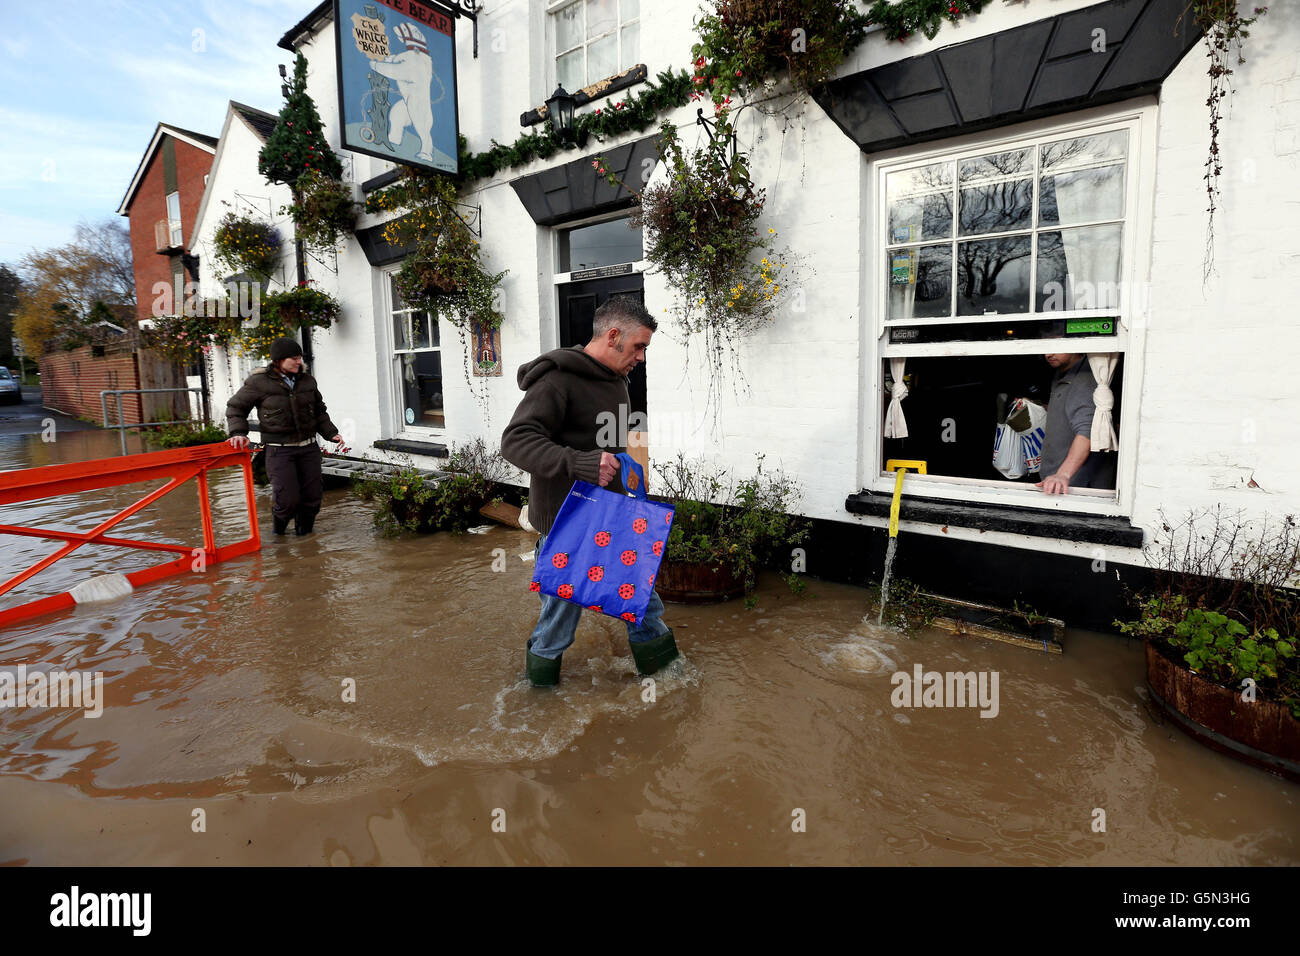 Friends bring supplies to David Boazman at the White Bear Pub in Tewkesbury, as he pumps flood water out of the pub. Stock Photo